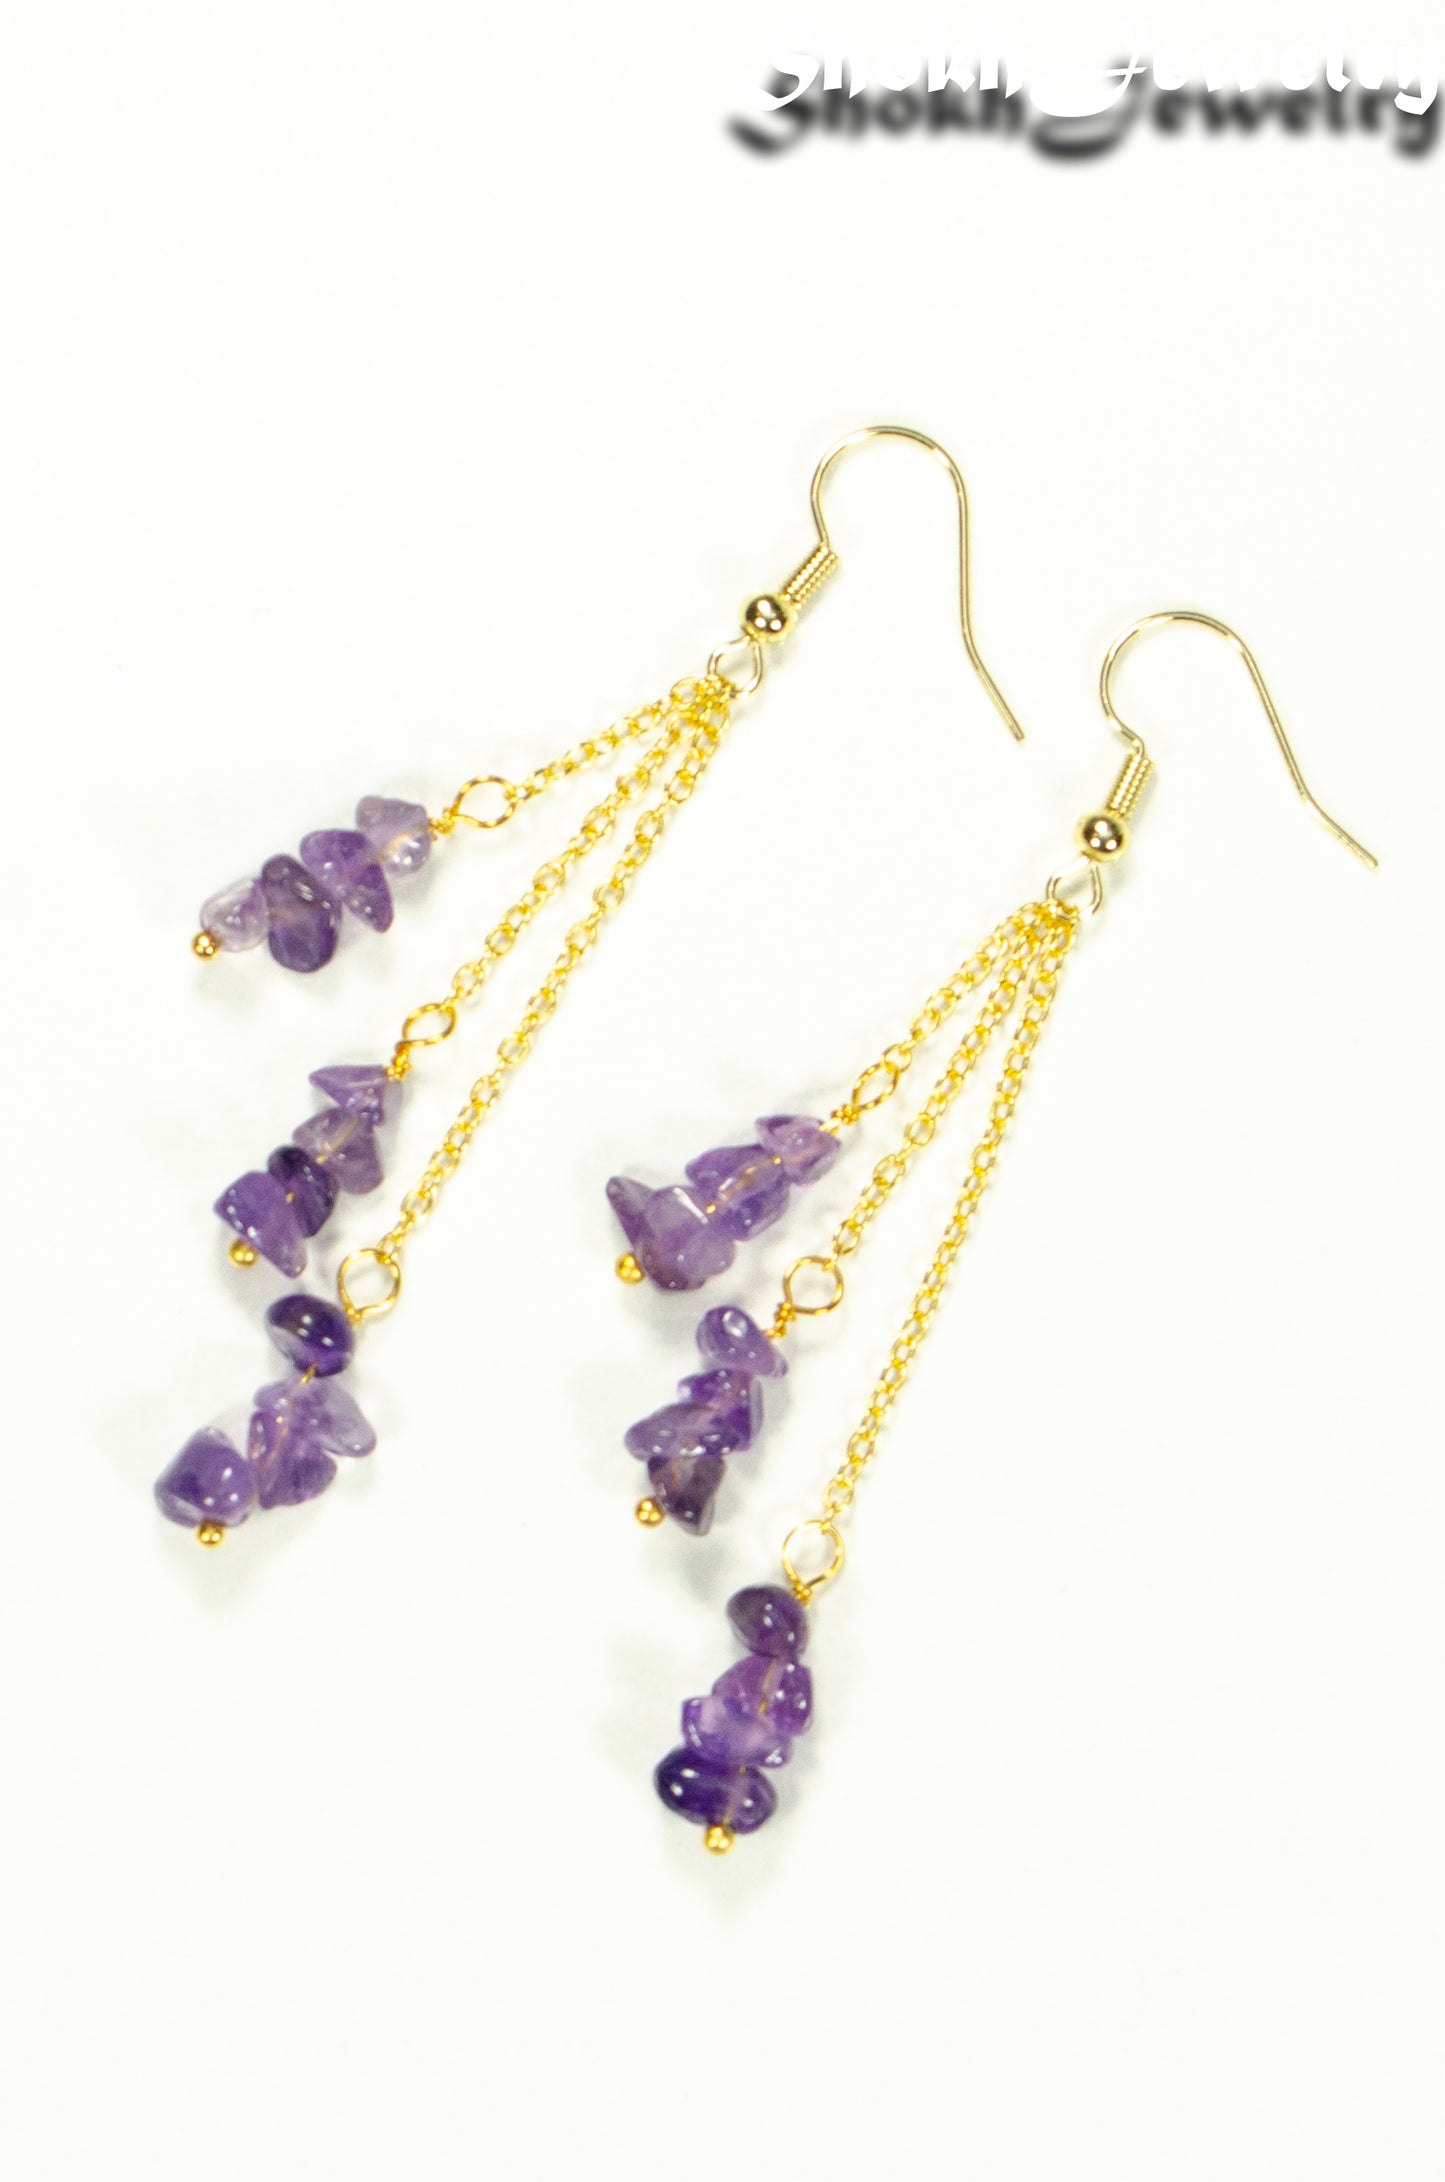 Top view of Long Gold Plated Chain and Amethyst Crystal Chip Earrings.